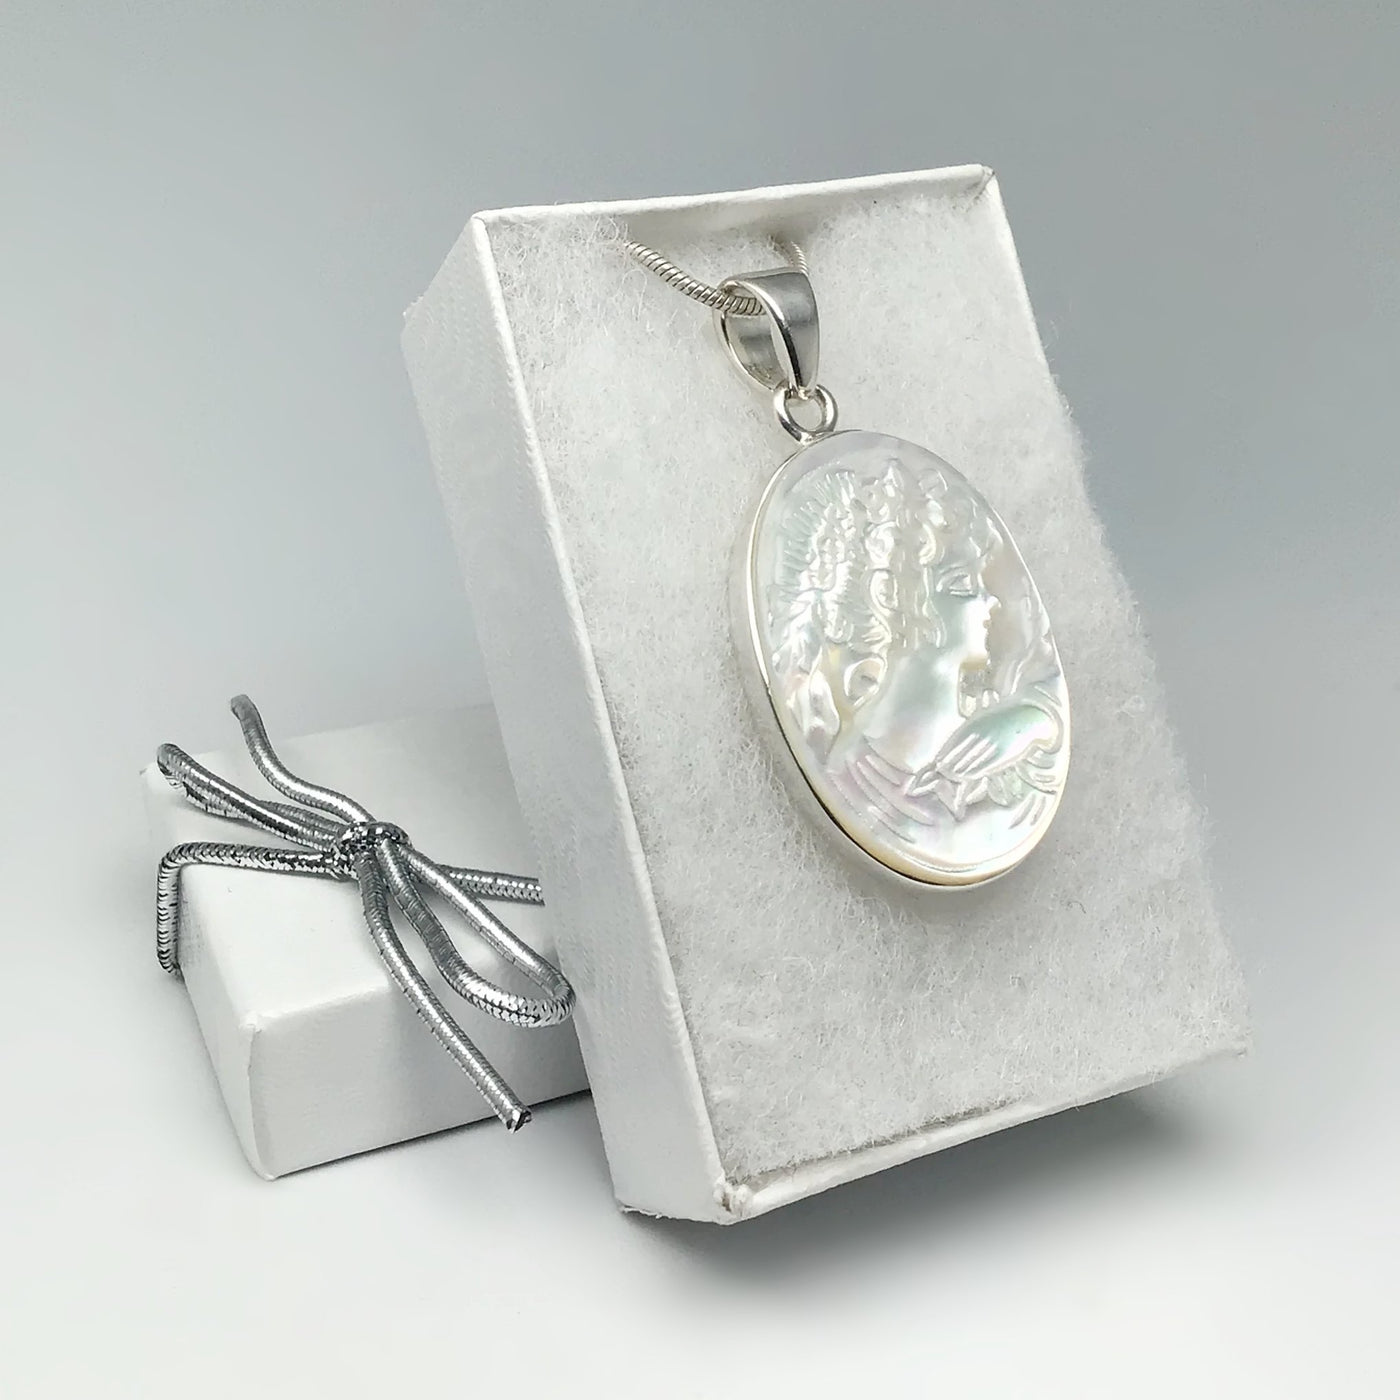 Mother of Pearl Cameo Pendant